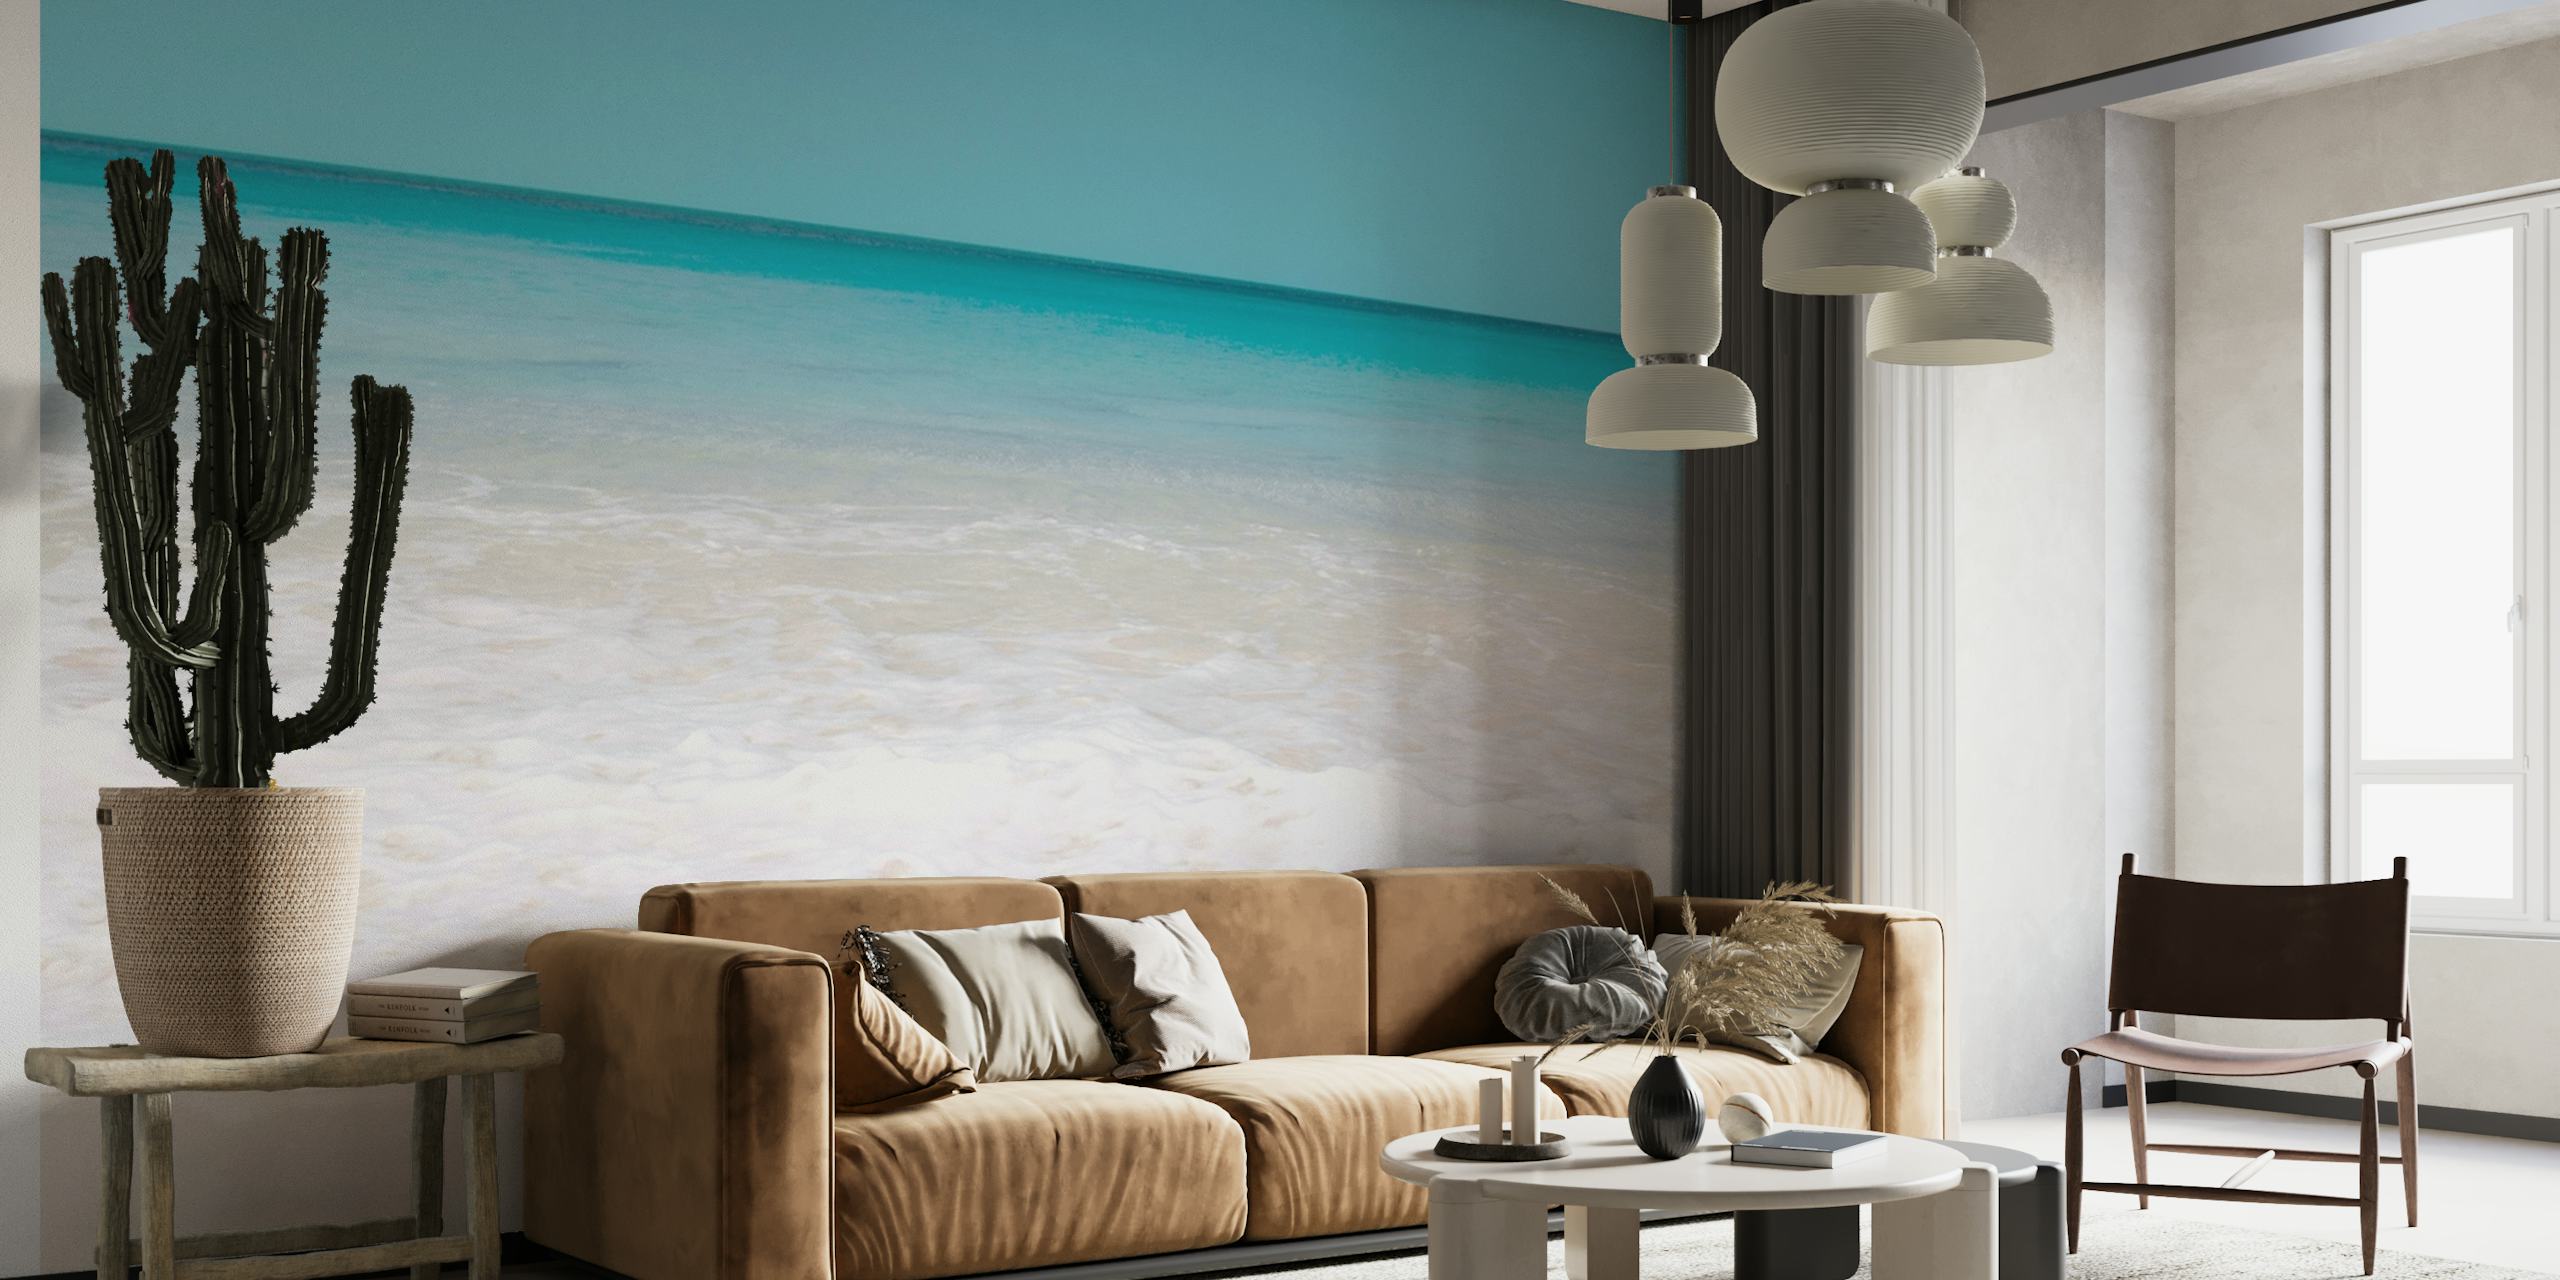 Caribbean beach wall mural showing white sands and turquoise ocean waters